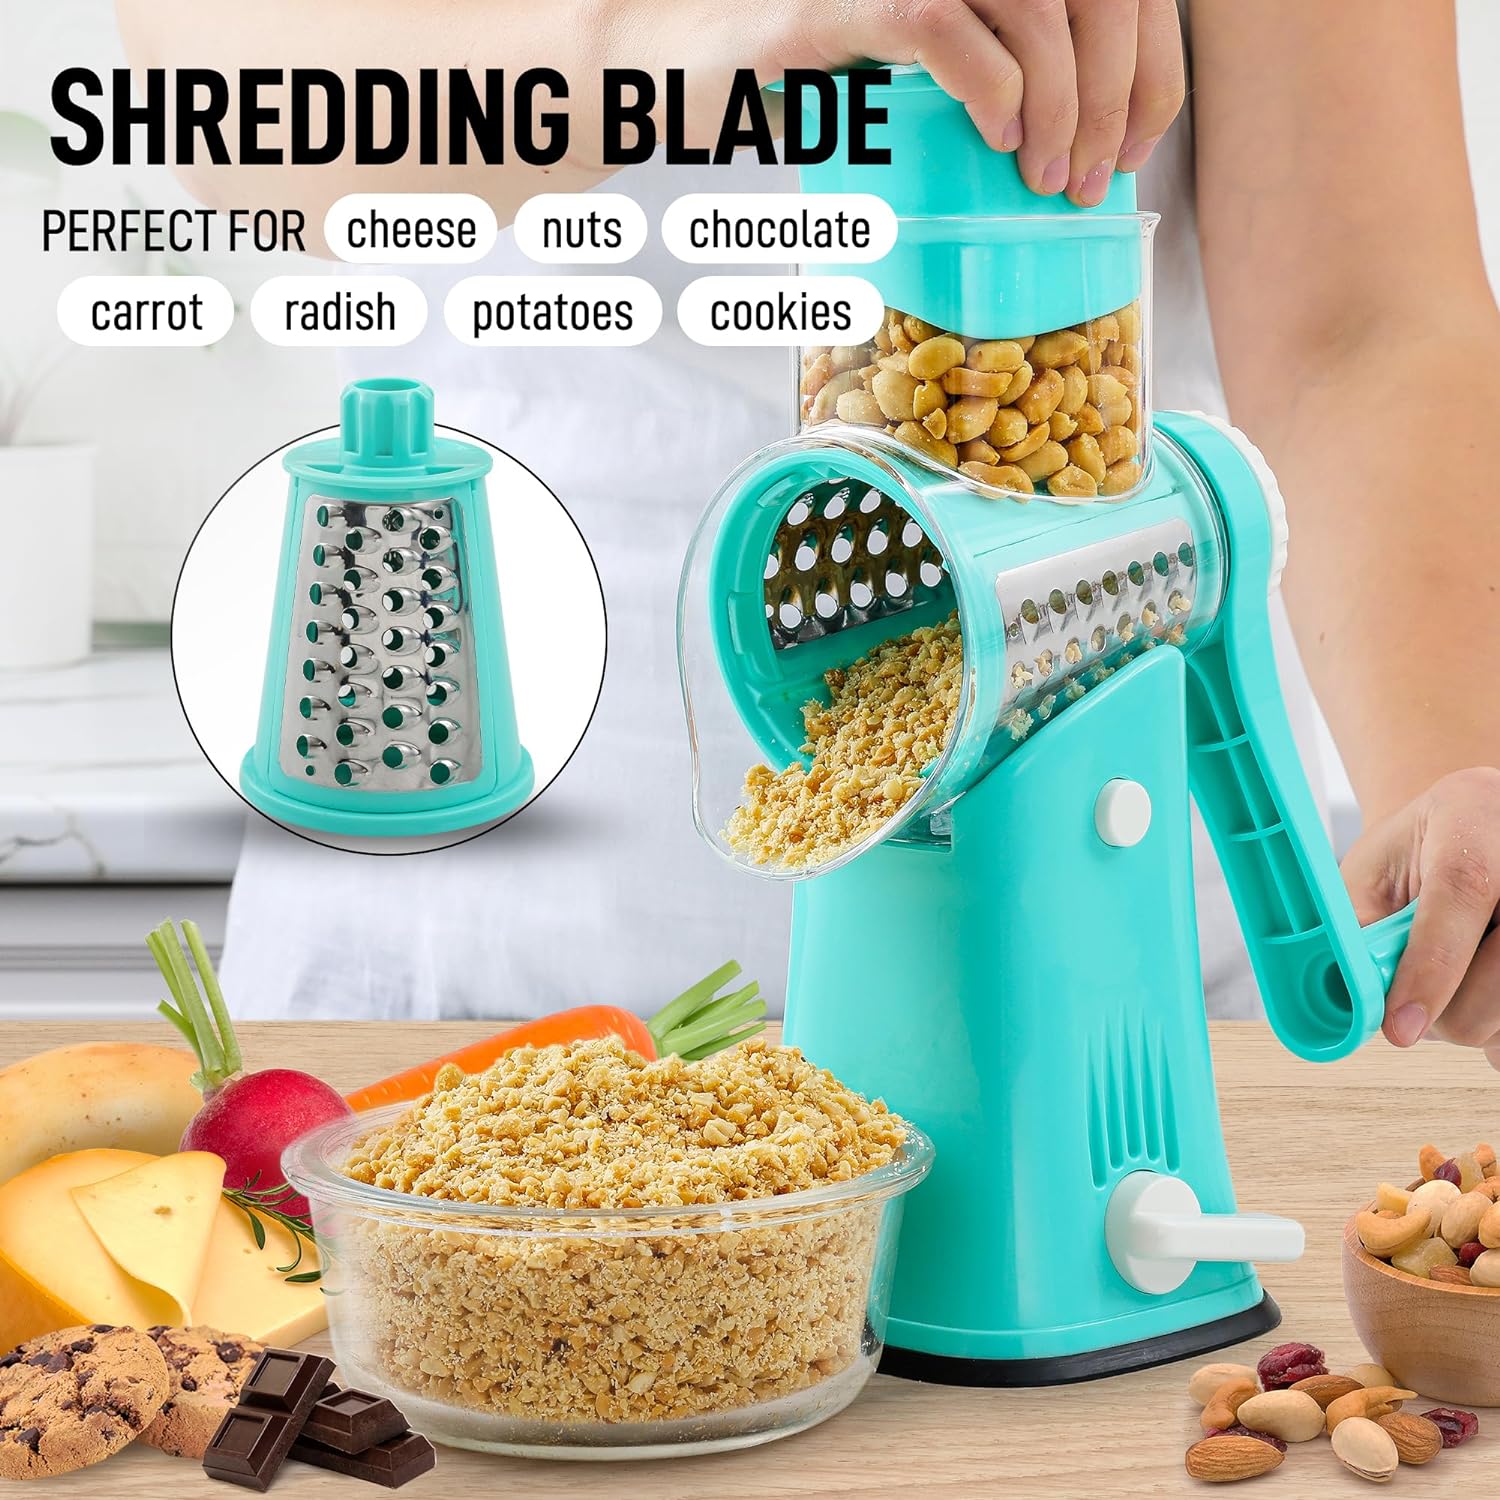 Rotary Cheese Grater Handheld, Vegetable Mandoline Slicer Easy Cleaning, Kitchen Cheese Grater Shredder with 3 Drum Blades